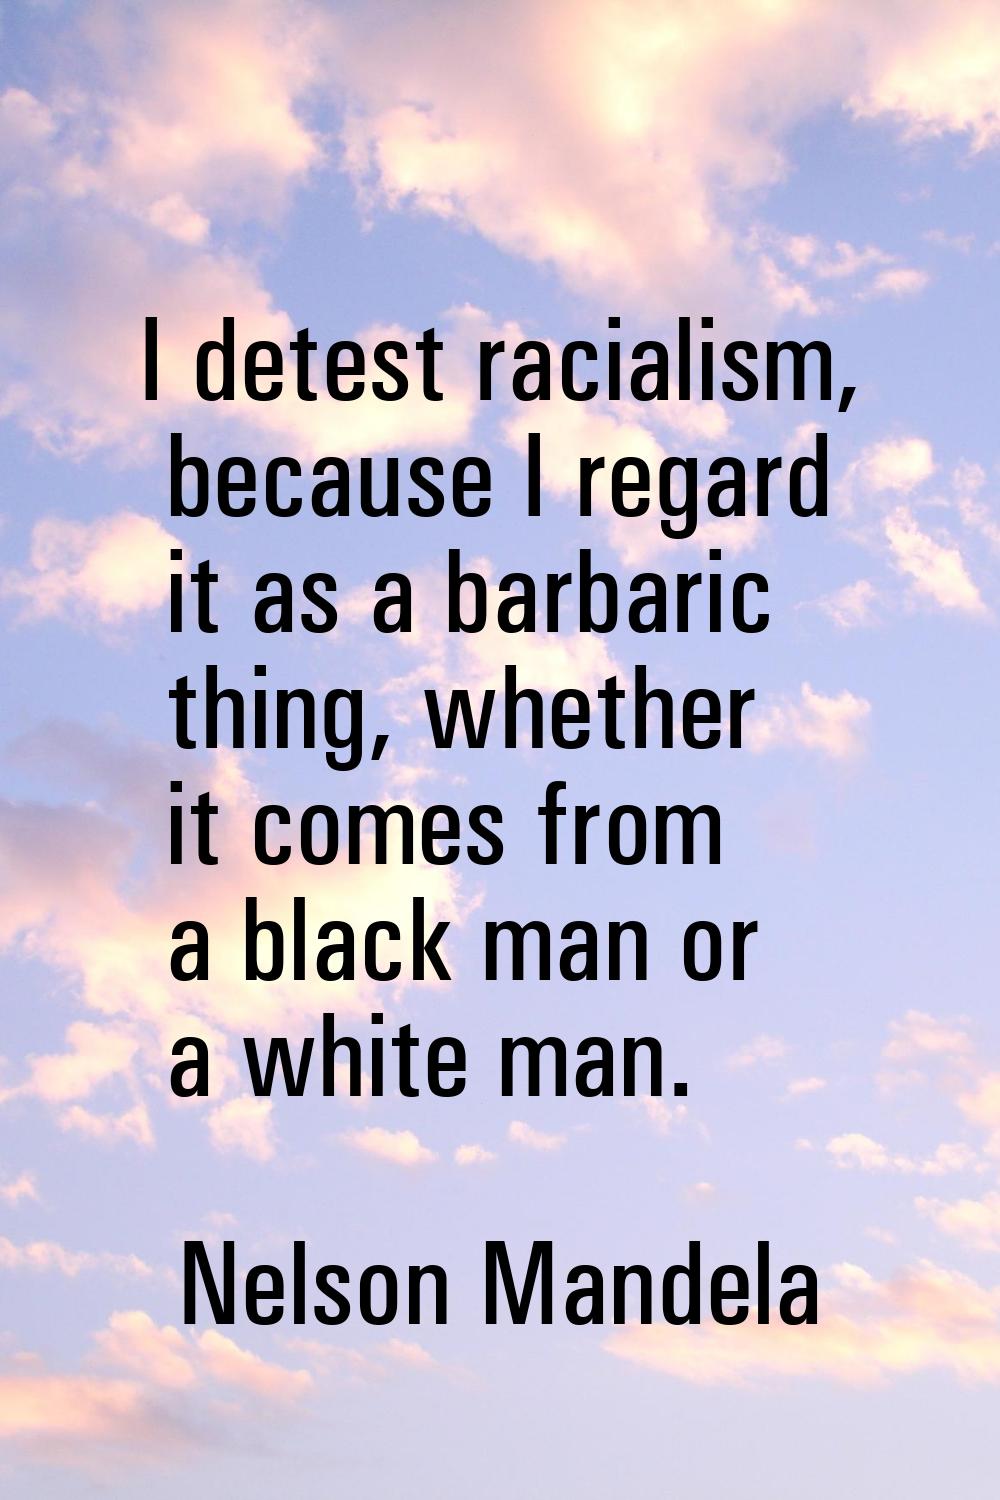 I detest racialism, because I regard it as a barbaric thing, whether it comes from a black man or a